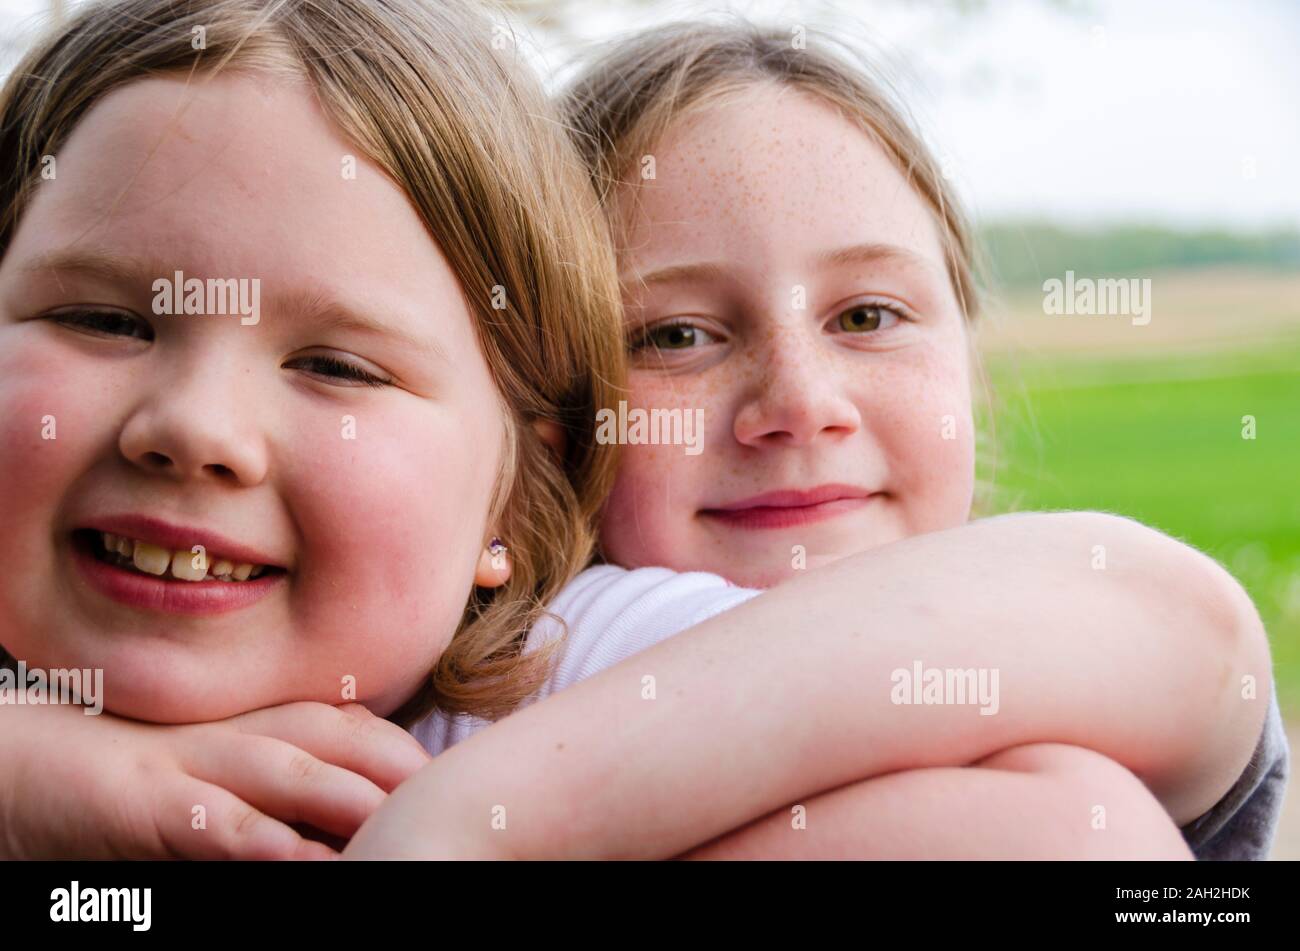 Two 10 year old girls hugging each other and smiling at the camera. Stock Photo